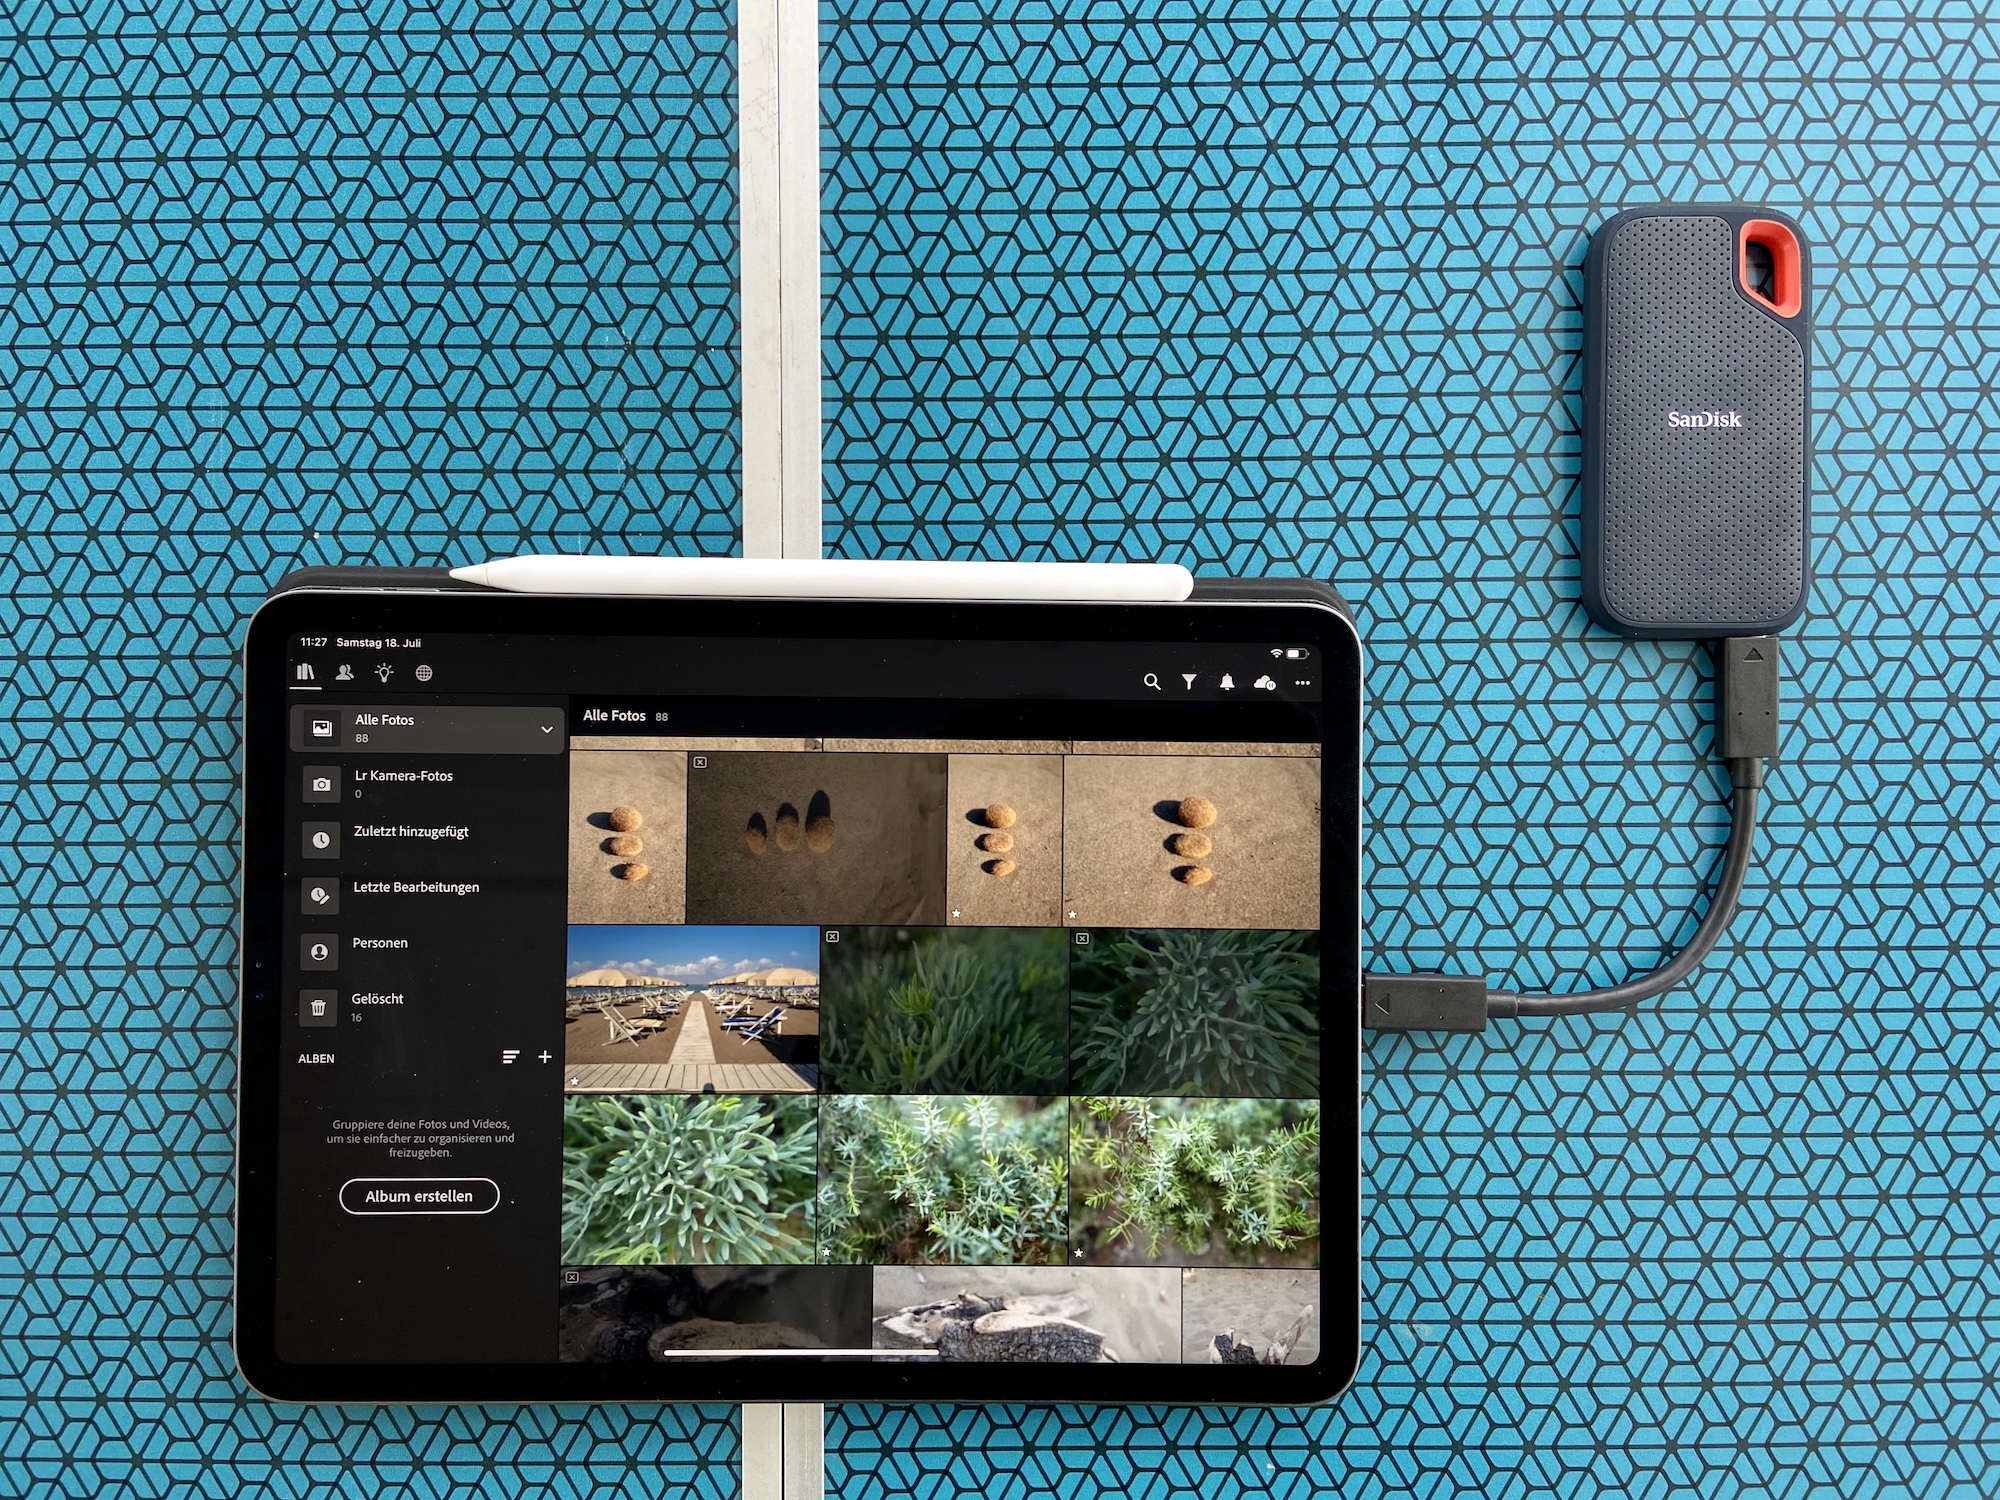 Backing up photos from the iPad Pro with an external San Disk SSD